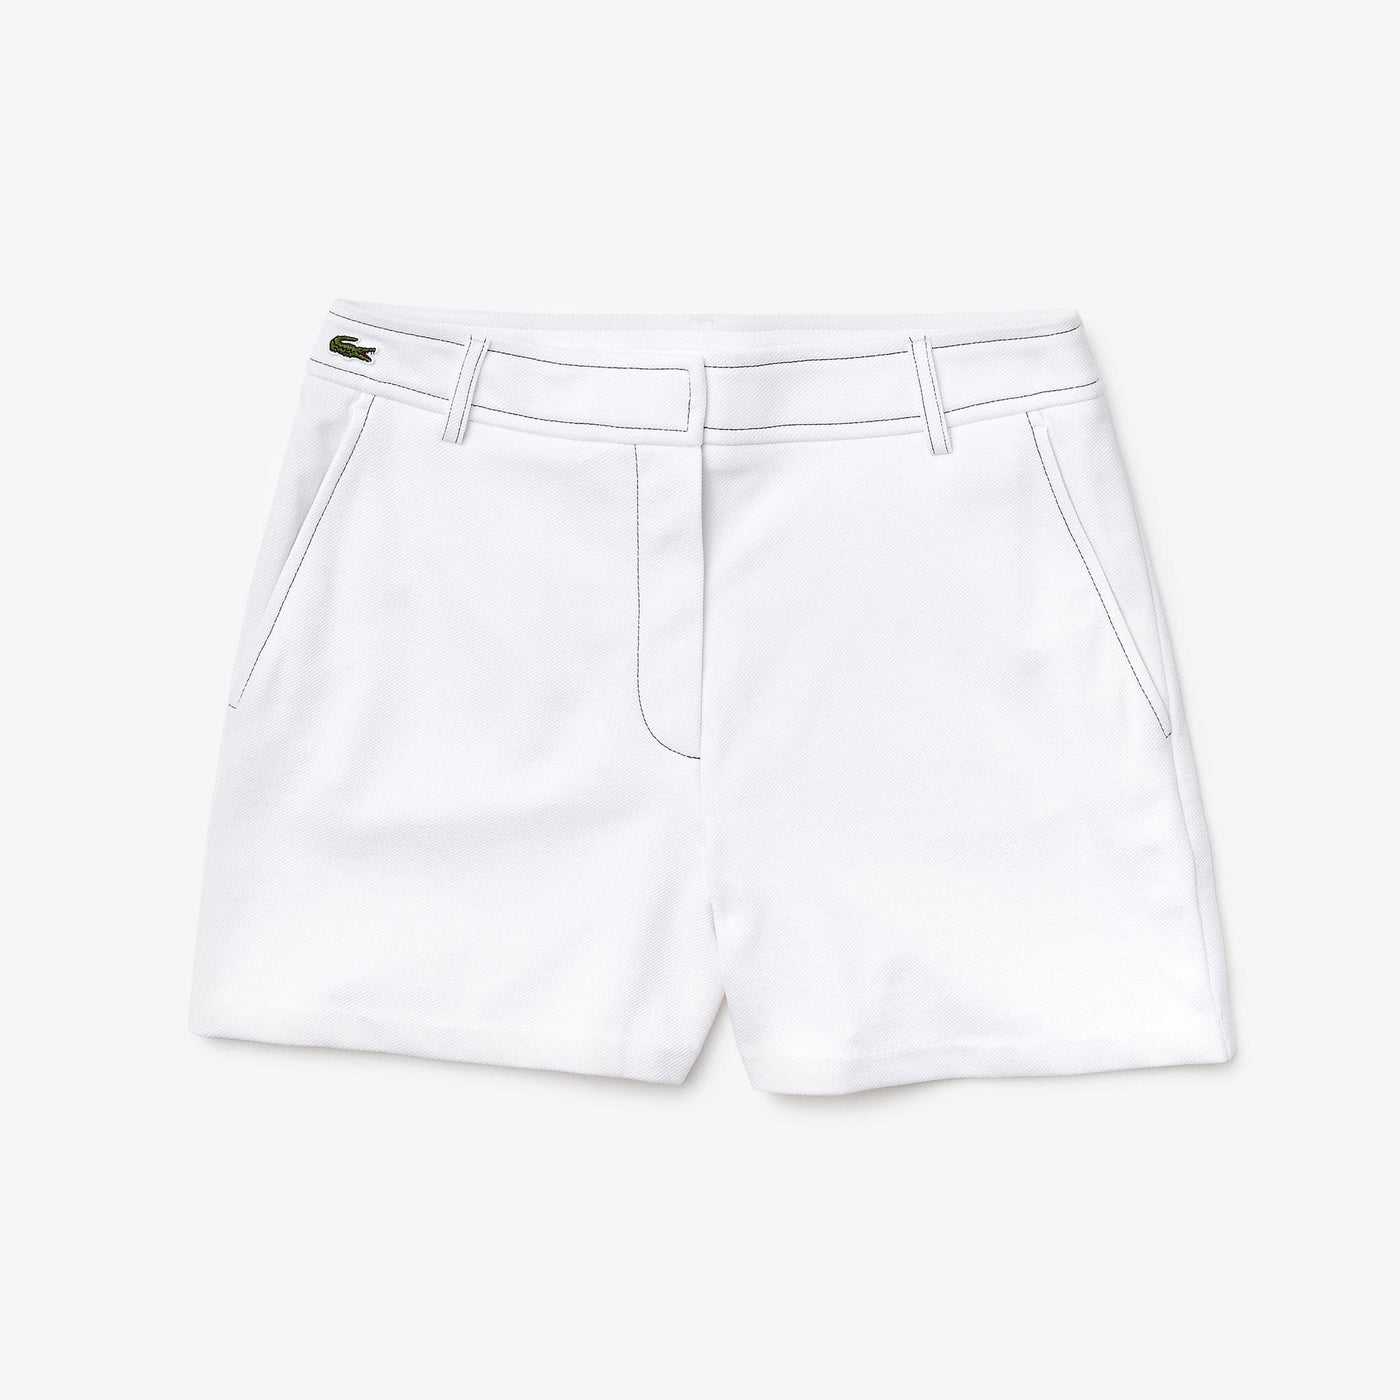 Shop The Latest Collection Of Outlet - Lacoste Women'S Contrast Stitching Shorts - Ff5634 In Lebanon